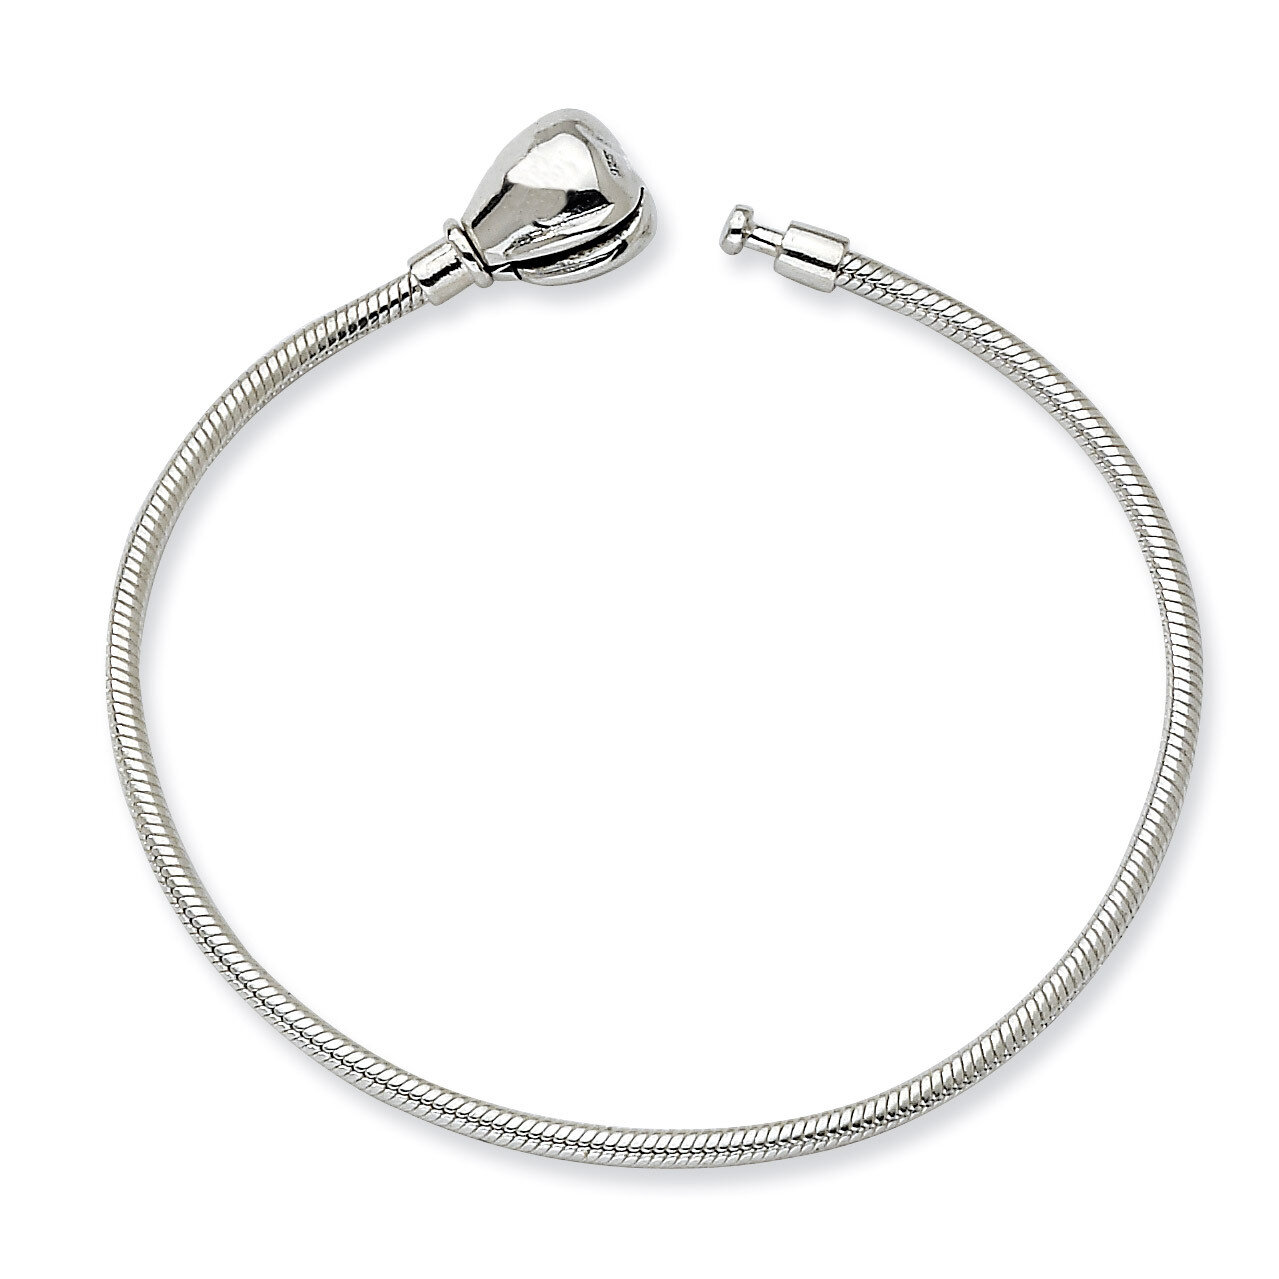 5.5 Inch 14cm Hinged Clasp Bead Bracelet - Sterling Silver QRS988-5.5